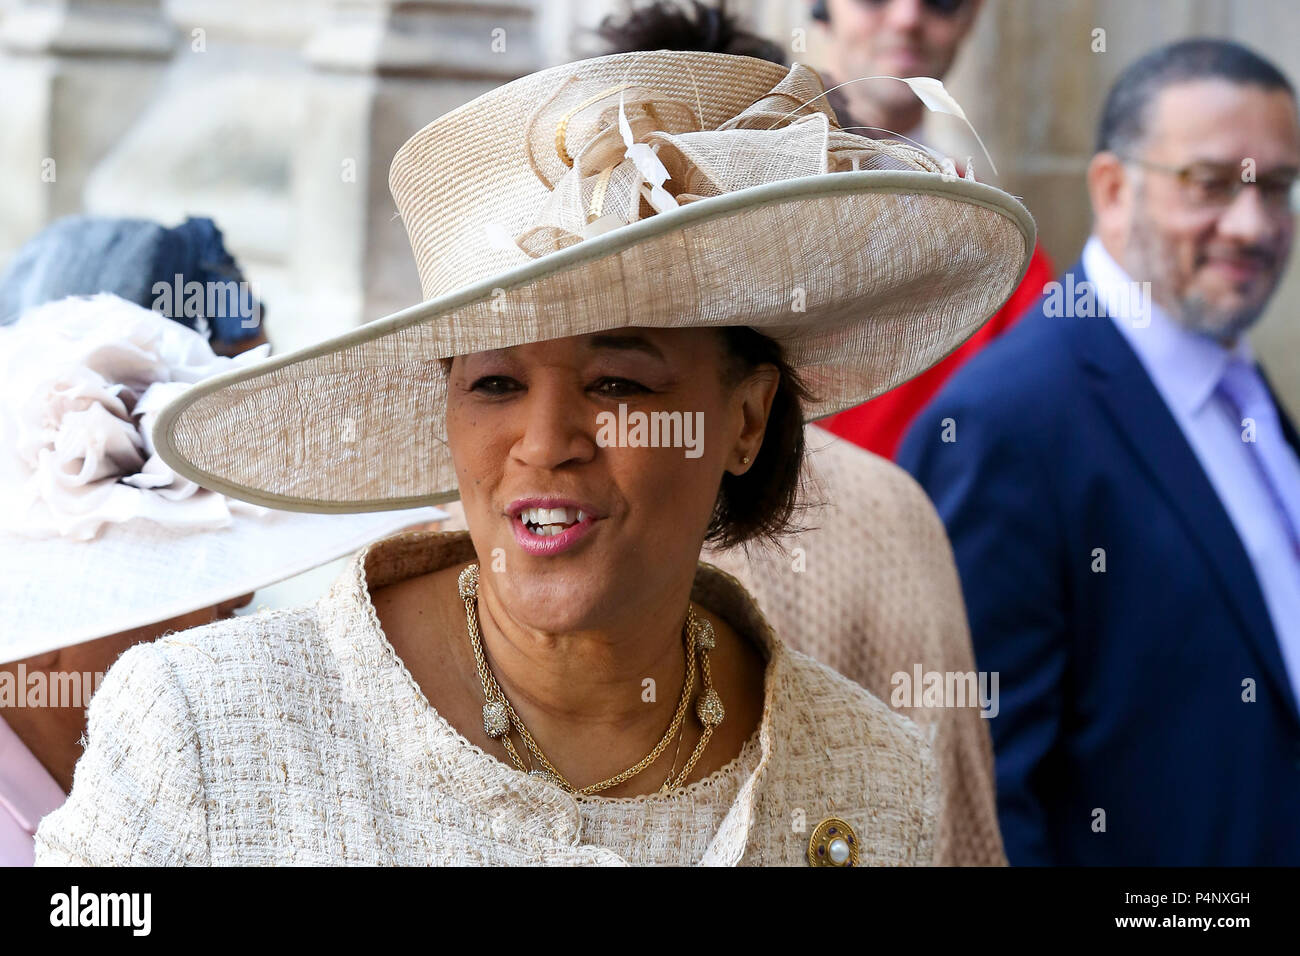 London, UK. 22nd June 2018.  Baroness Scotland arrives Westminster Abbey to attend a Service of Thanksgiving on the 70th Anniversary of the landing of the Empire Windrush MV on 22 June 1948 at Tilbury Docks with 492 Caribbean passengers.    Credit: Dinendra Haria/Alamy Live News Stock Photo